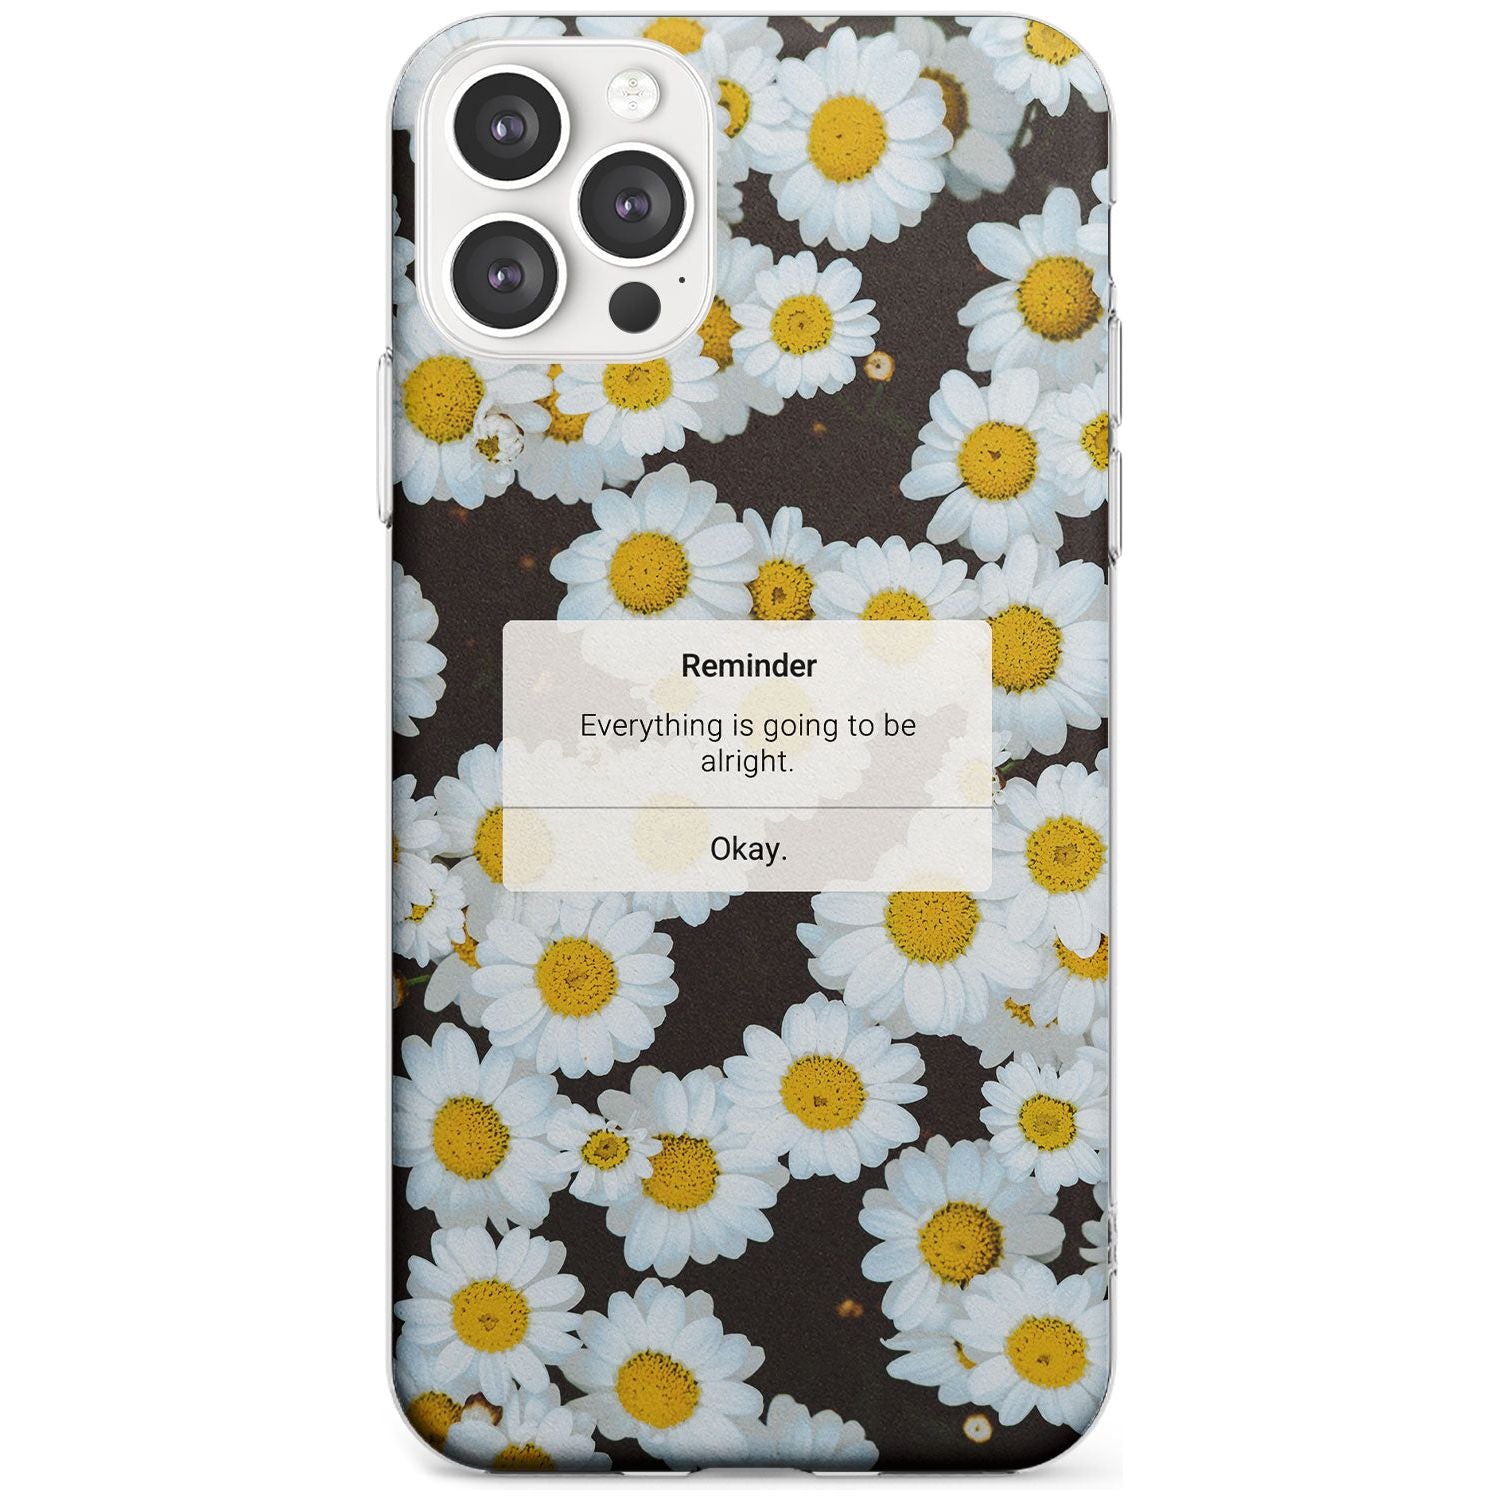 "Everything will be alright" iPhone Reminder Black Impact Phone Case for iPhone 11 Pro Max